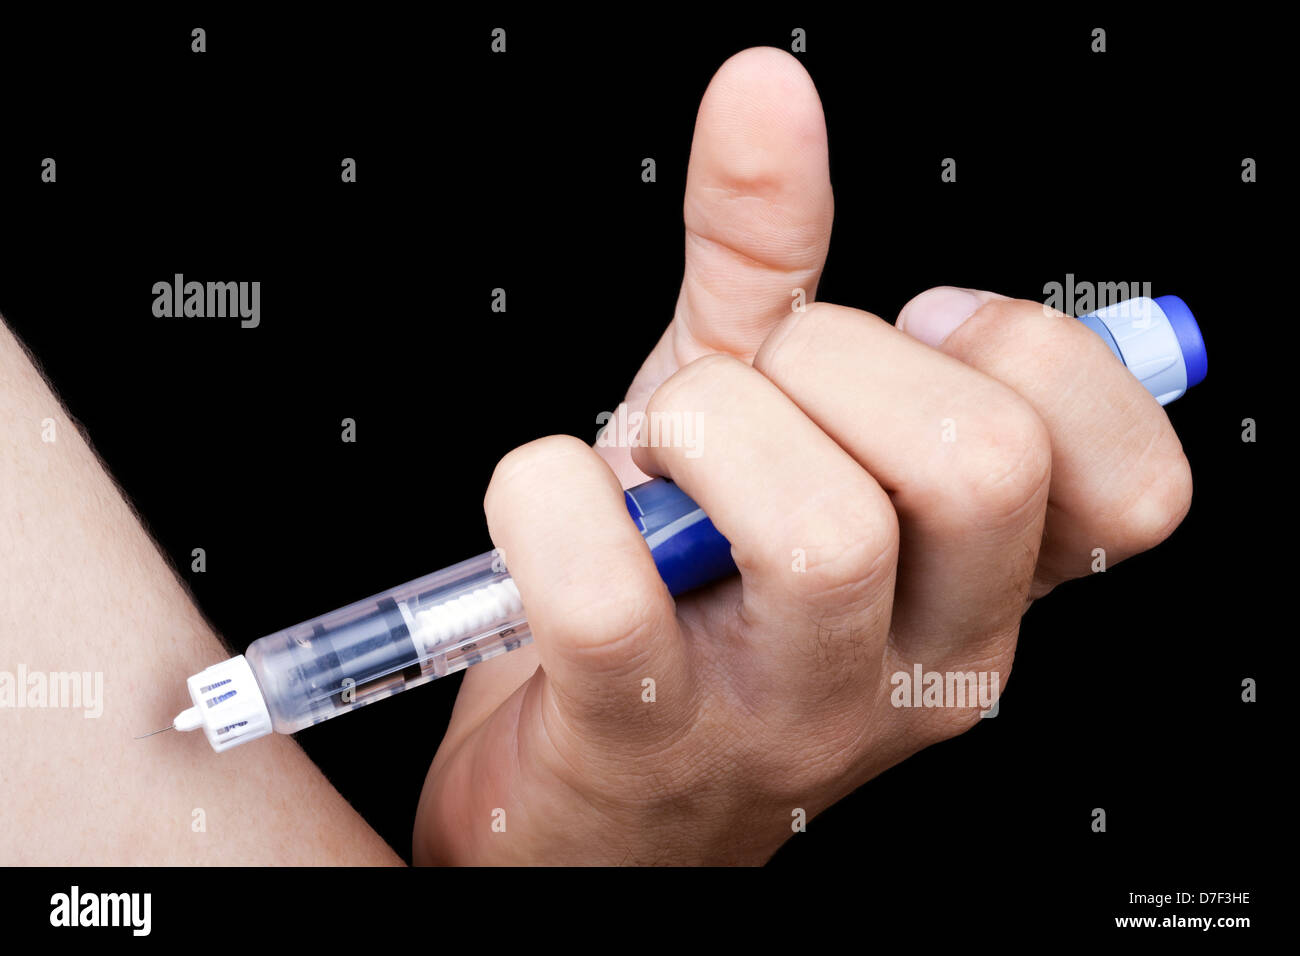 A macro shot hand holding syringe full insulin about to penetrate arm young adult man Diabetes. Isolated on black background. Stock Photo